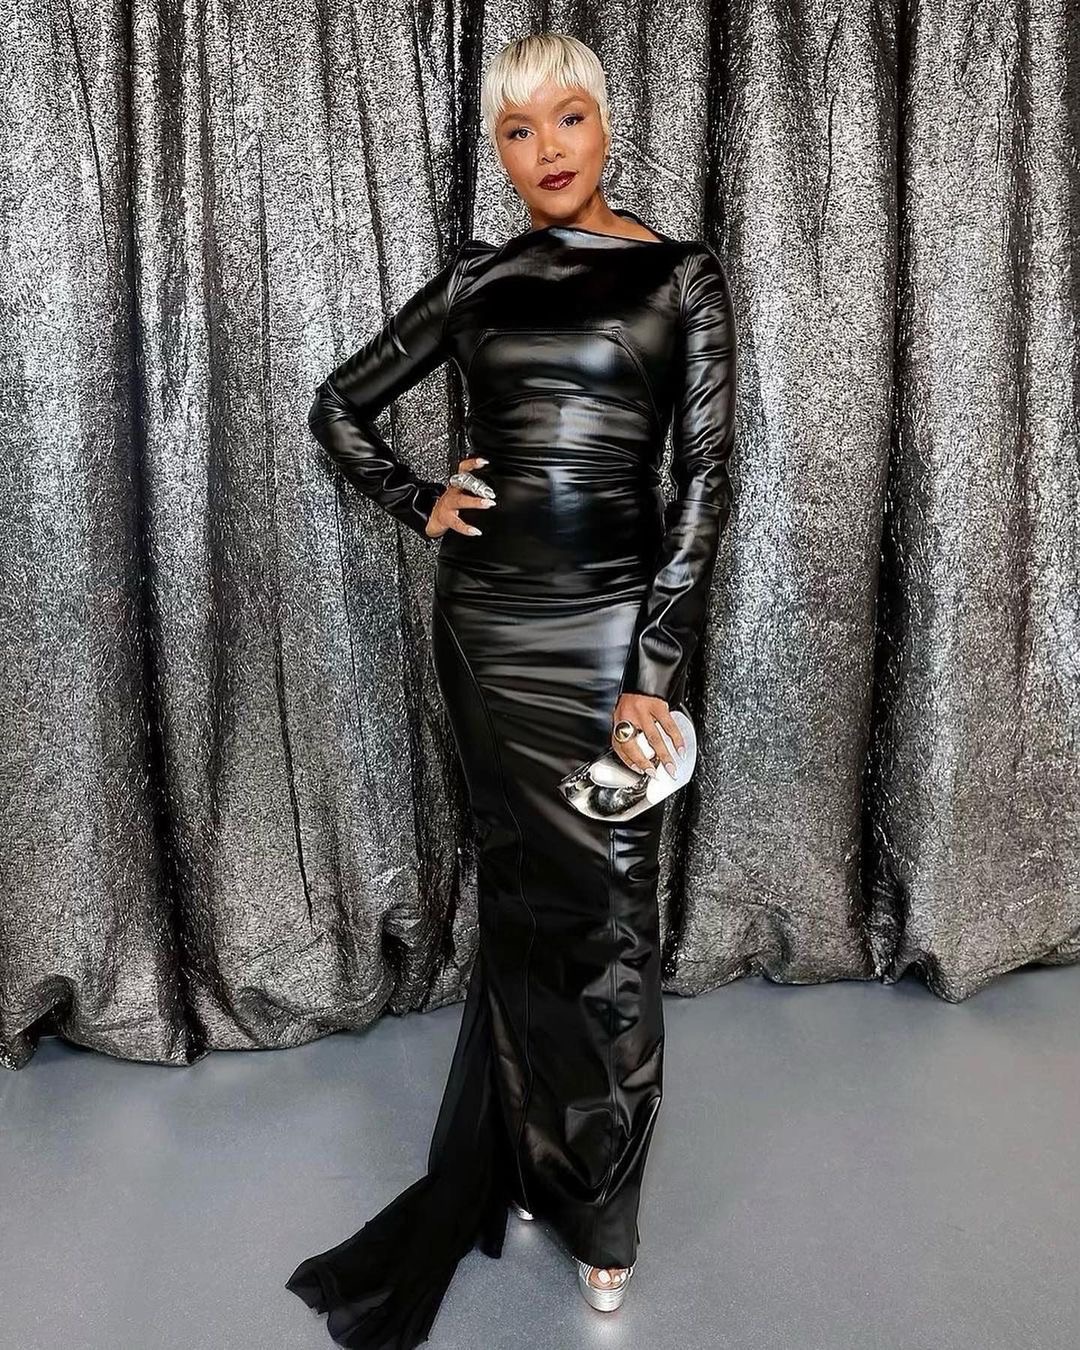 The Renaissance Movie Premiere Beyonce in a Custom Silver Versace Look Kelly Rowland in Metallic Jean Paul Gaultier Haute Couture Michelle Williams in a Black Bishme cromartie Gown More Celebs 5